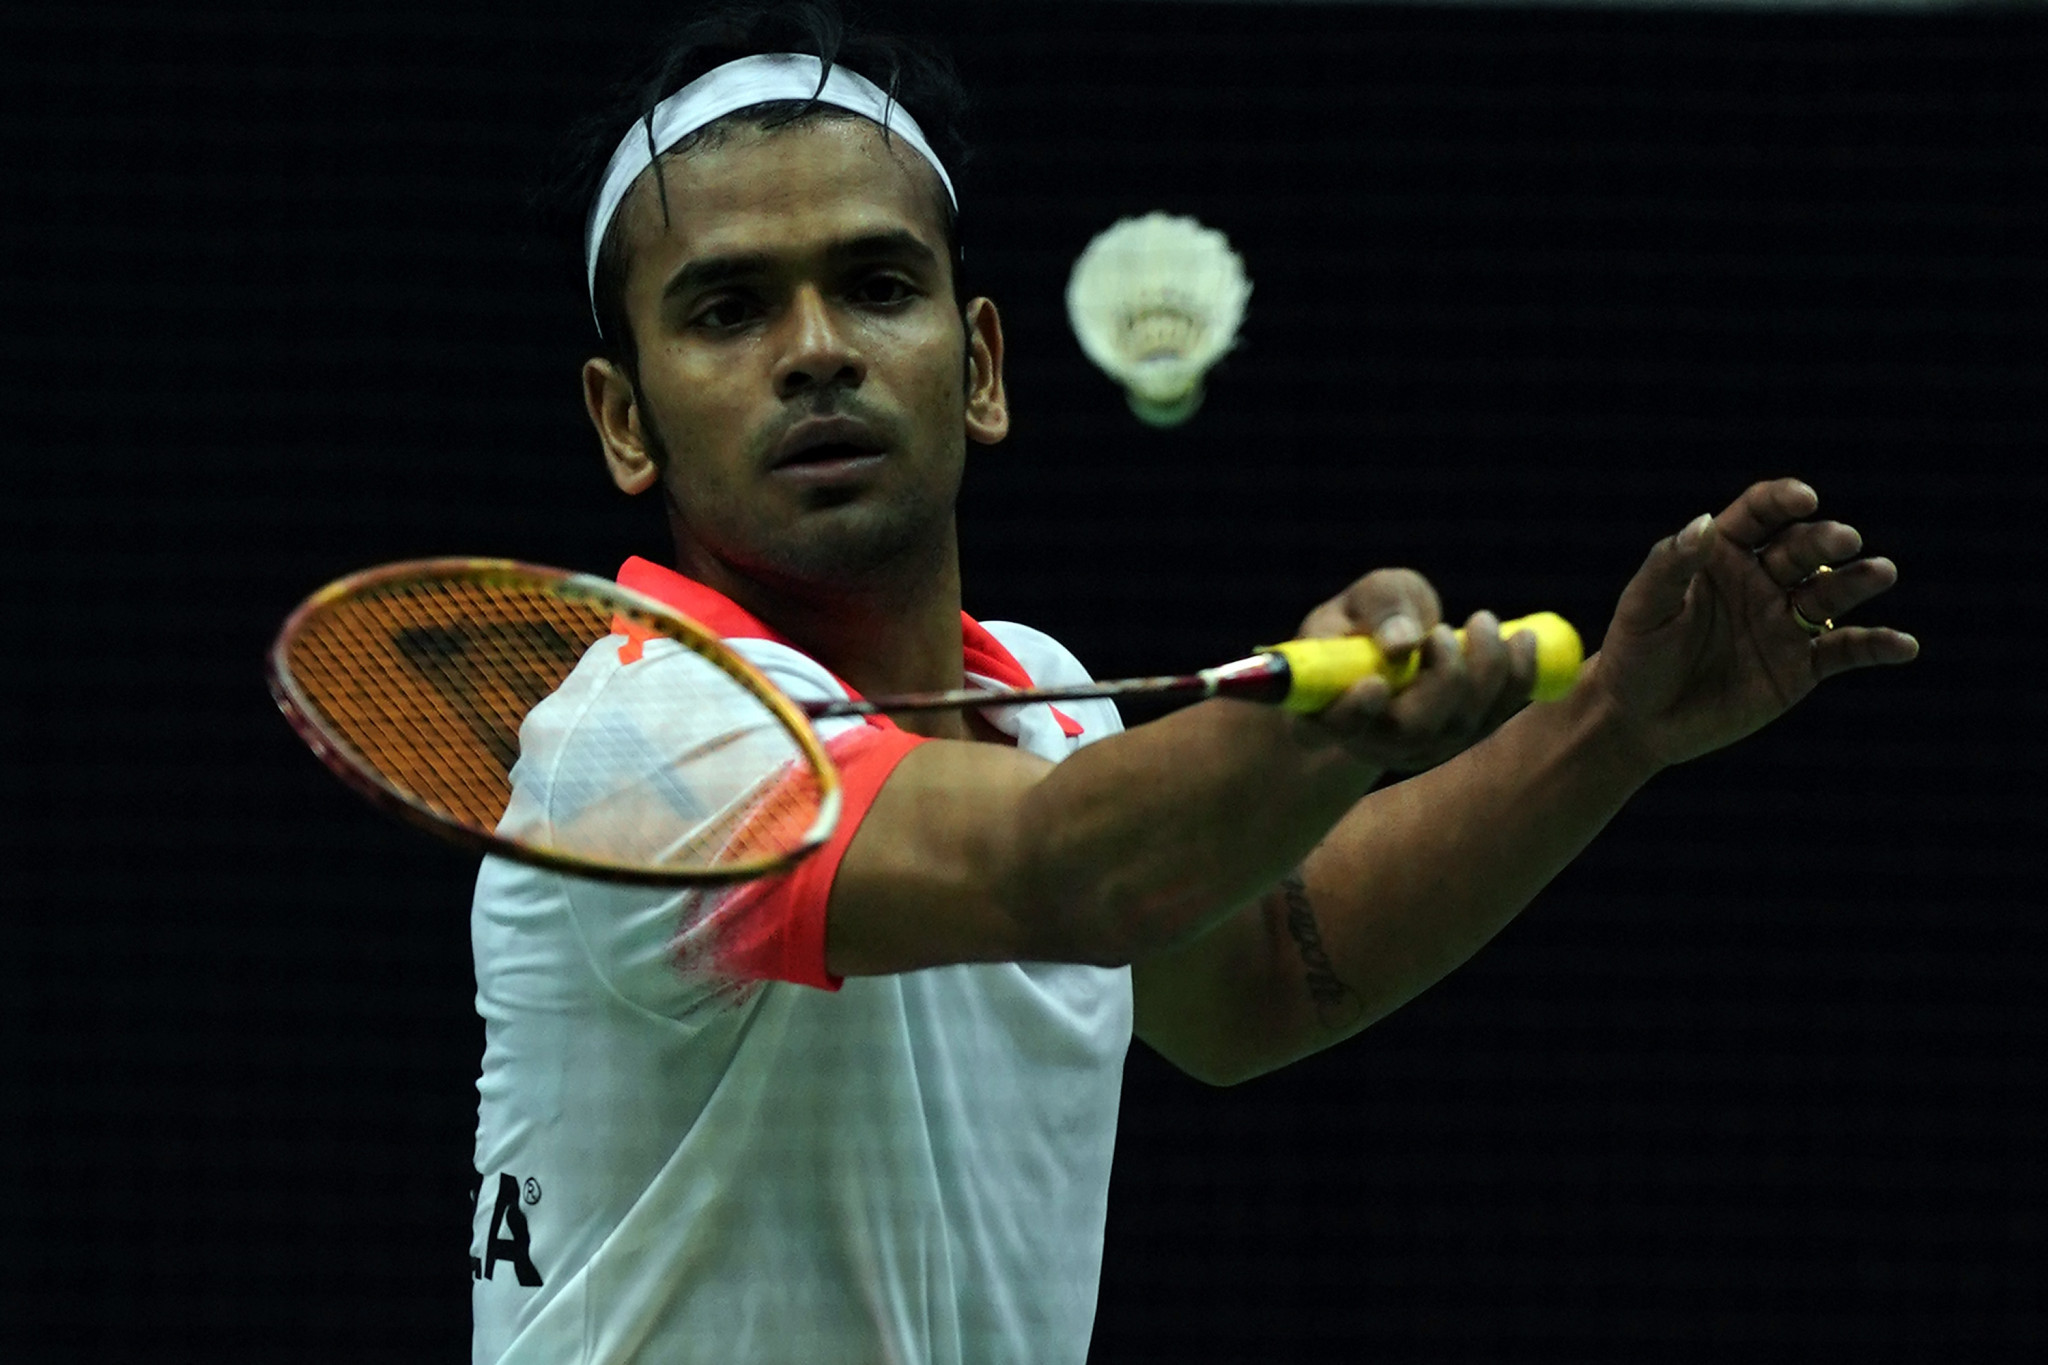 India's Subhankar Dey is the men's singles top seed ©Getty Images